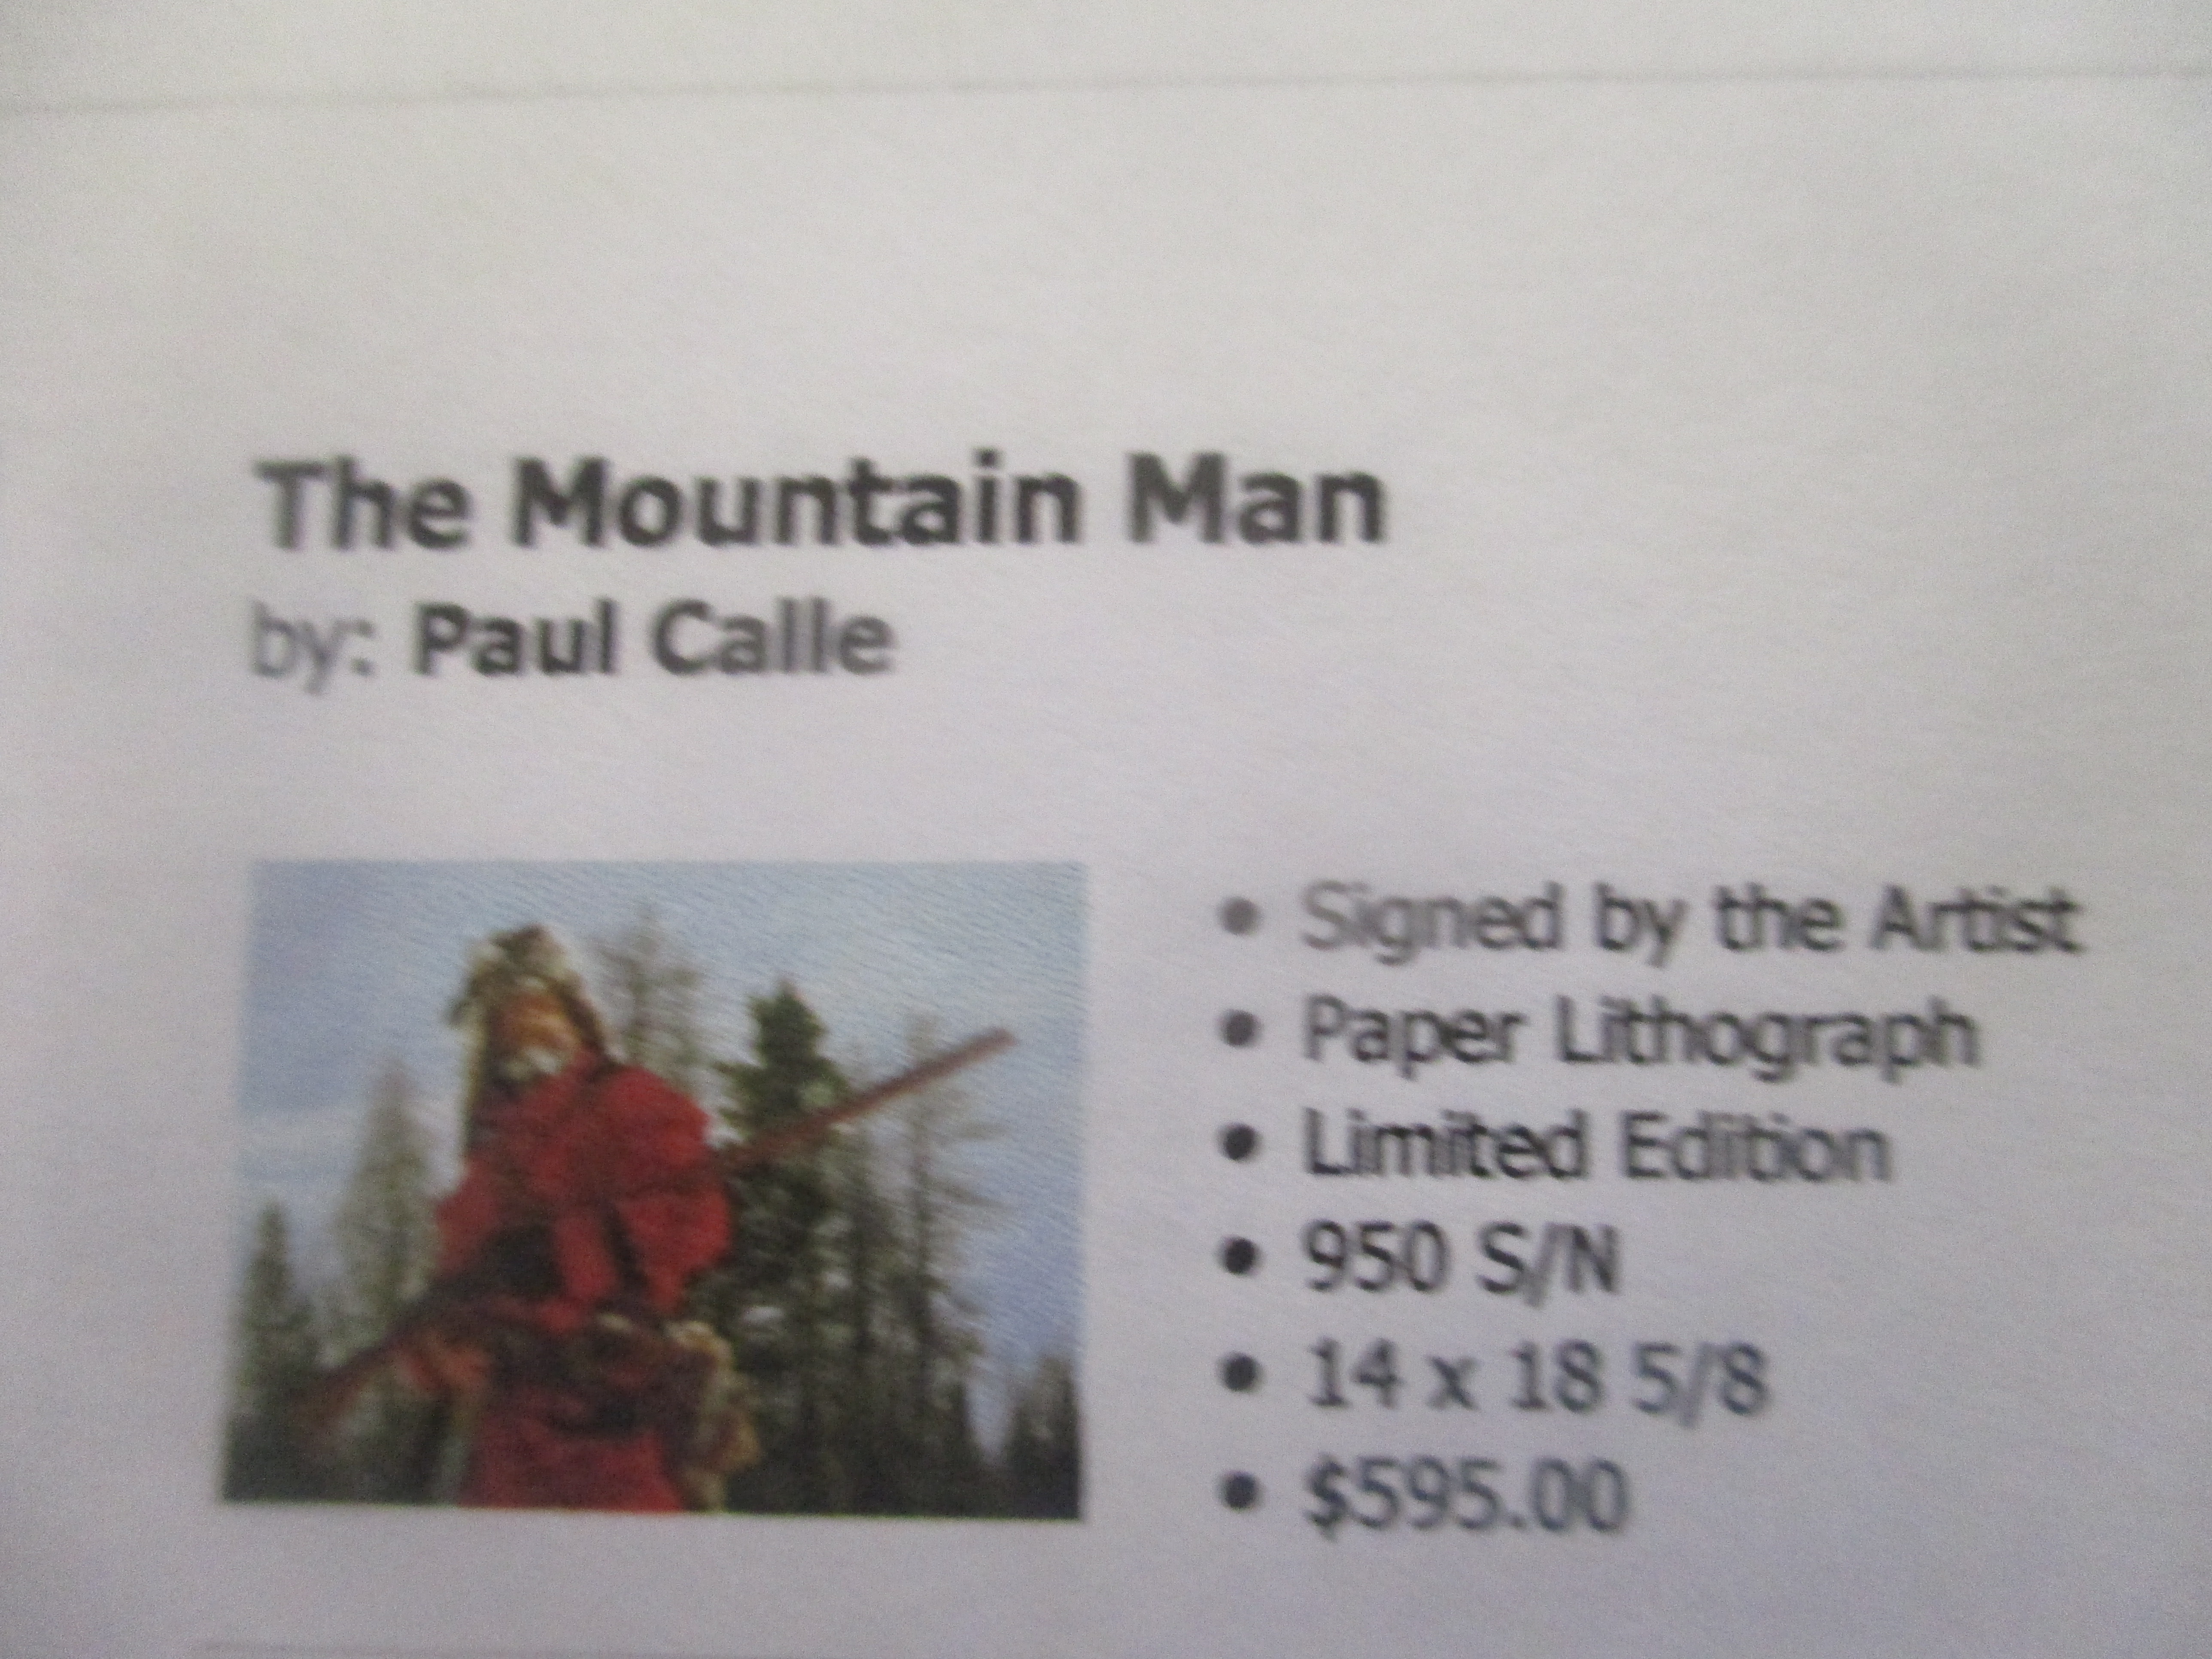 The Mountain Man by Paul Calle